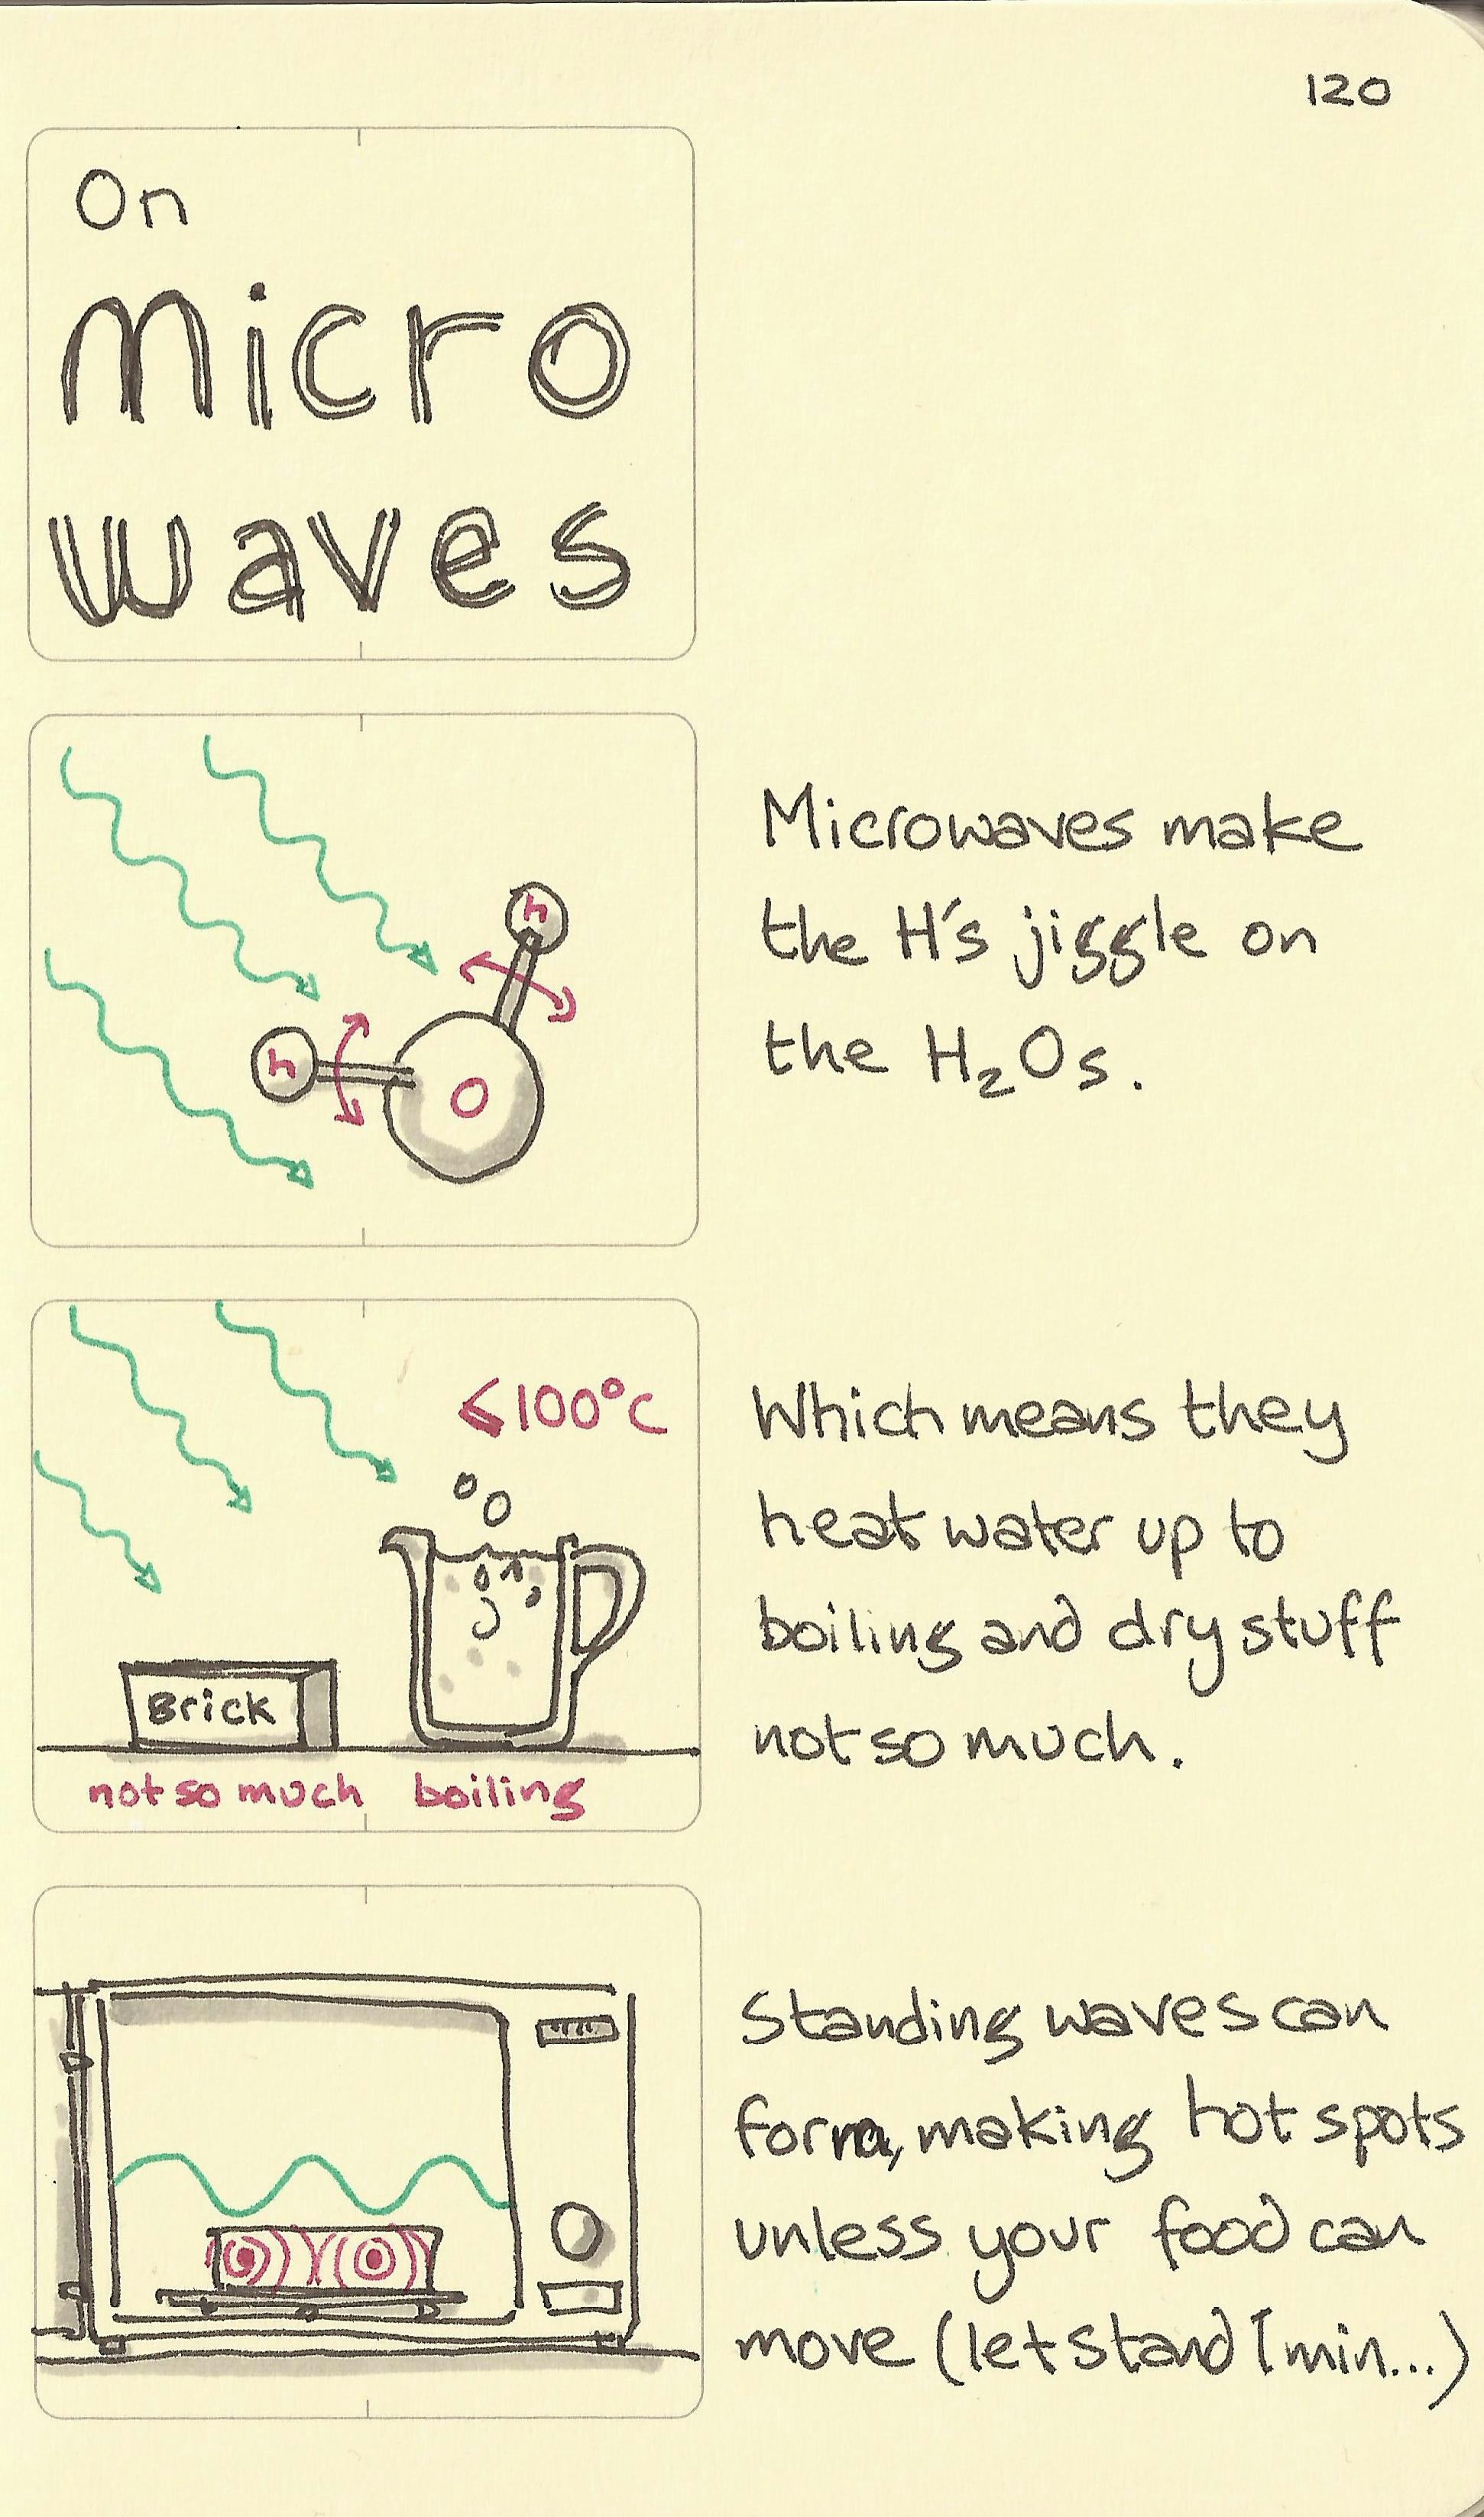 On microwaves - Sketchplanations